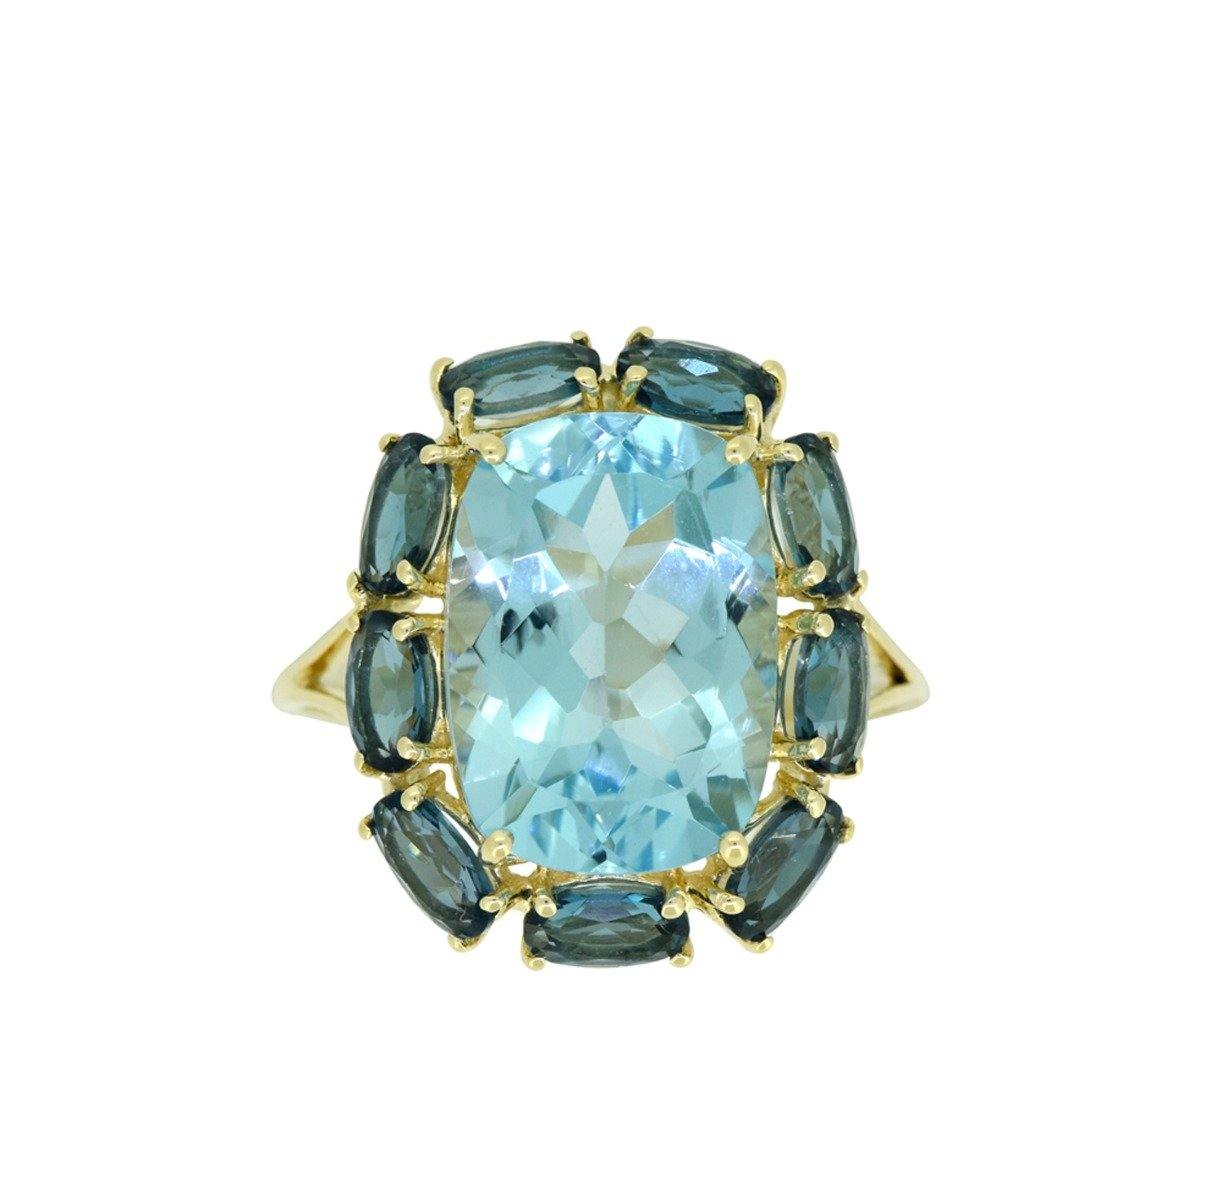 10.05 Ct Sky Blue Topaz Solid 14k Yellow Gold Cluster Ring Jewelry - YoTreasure